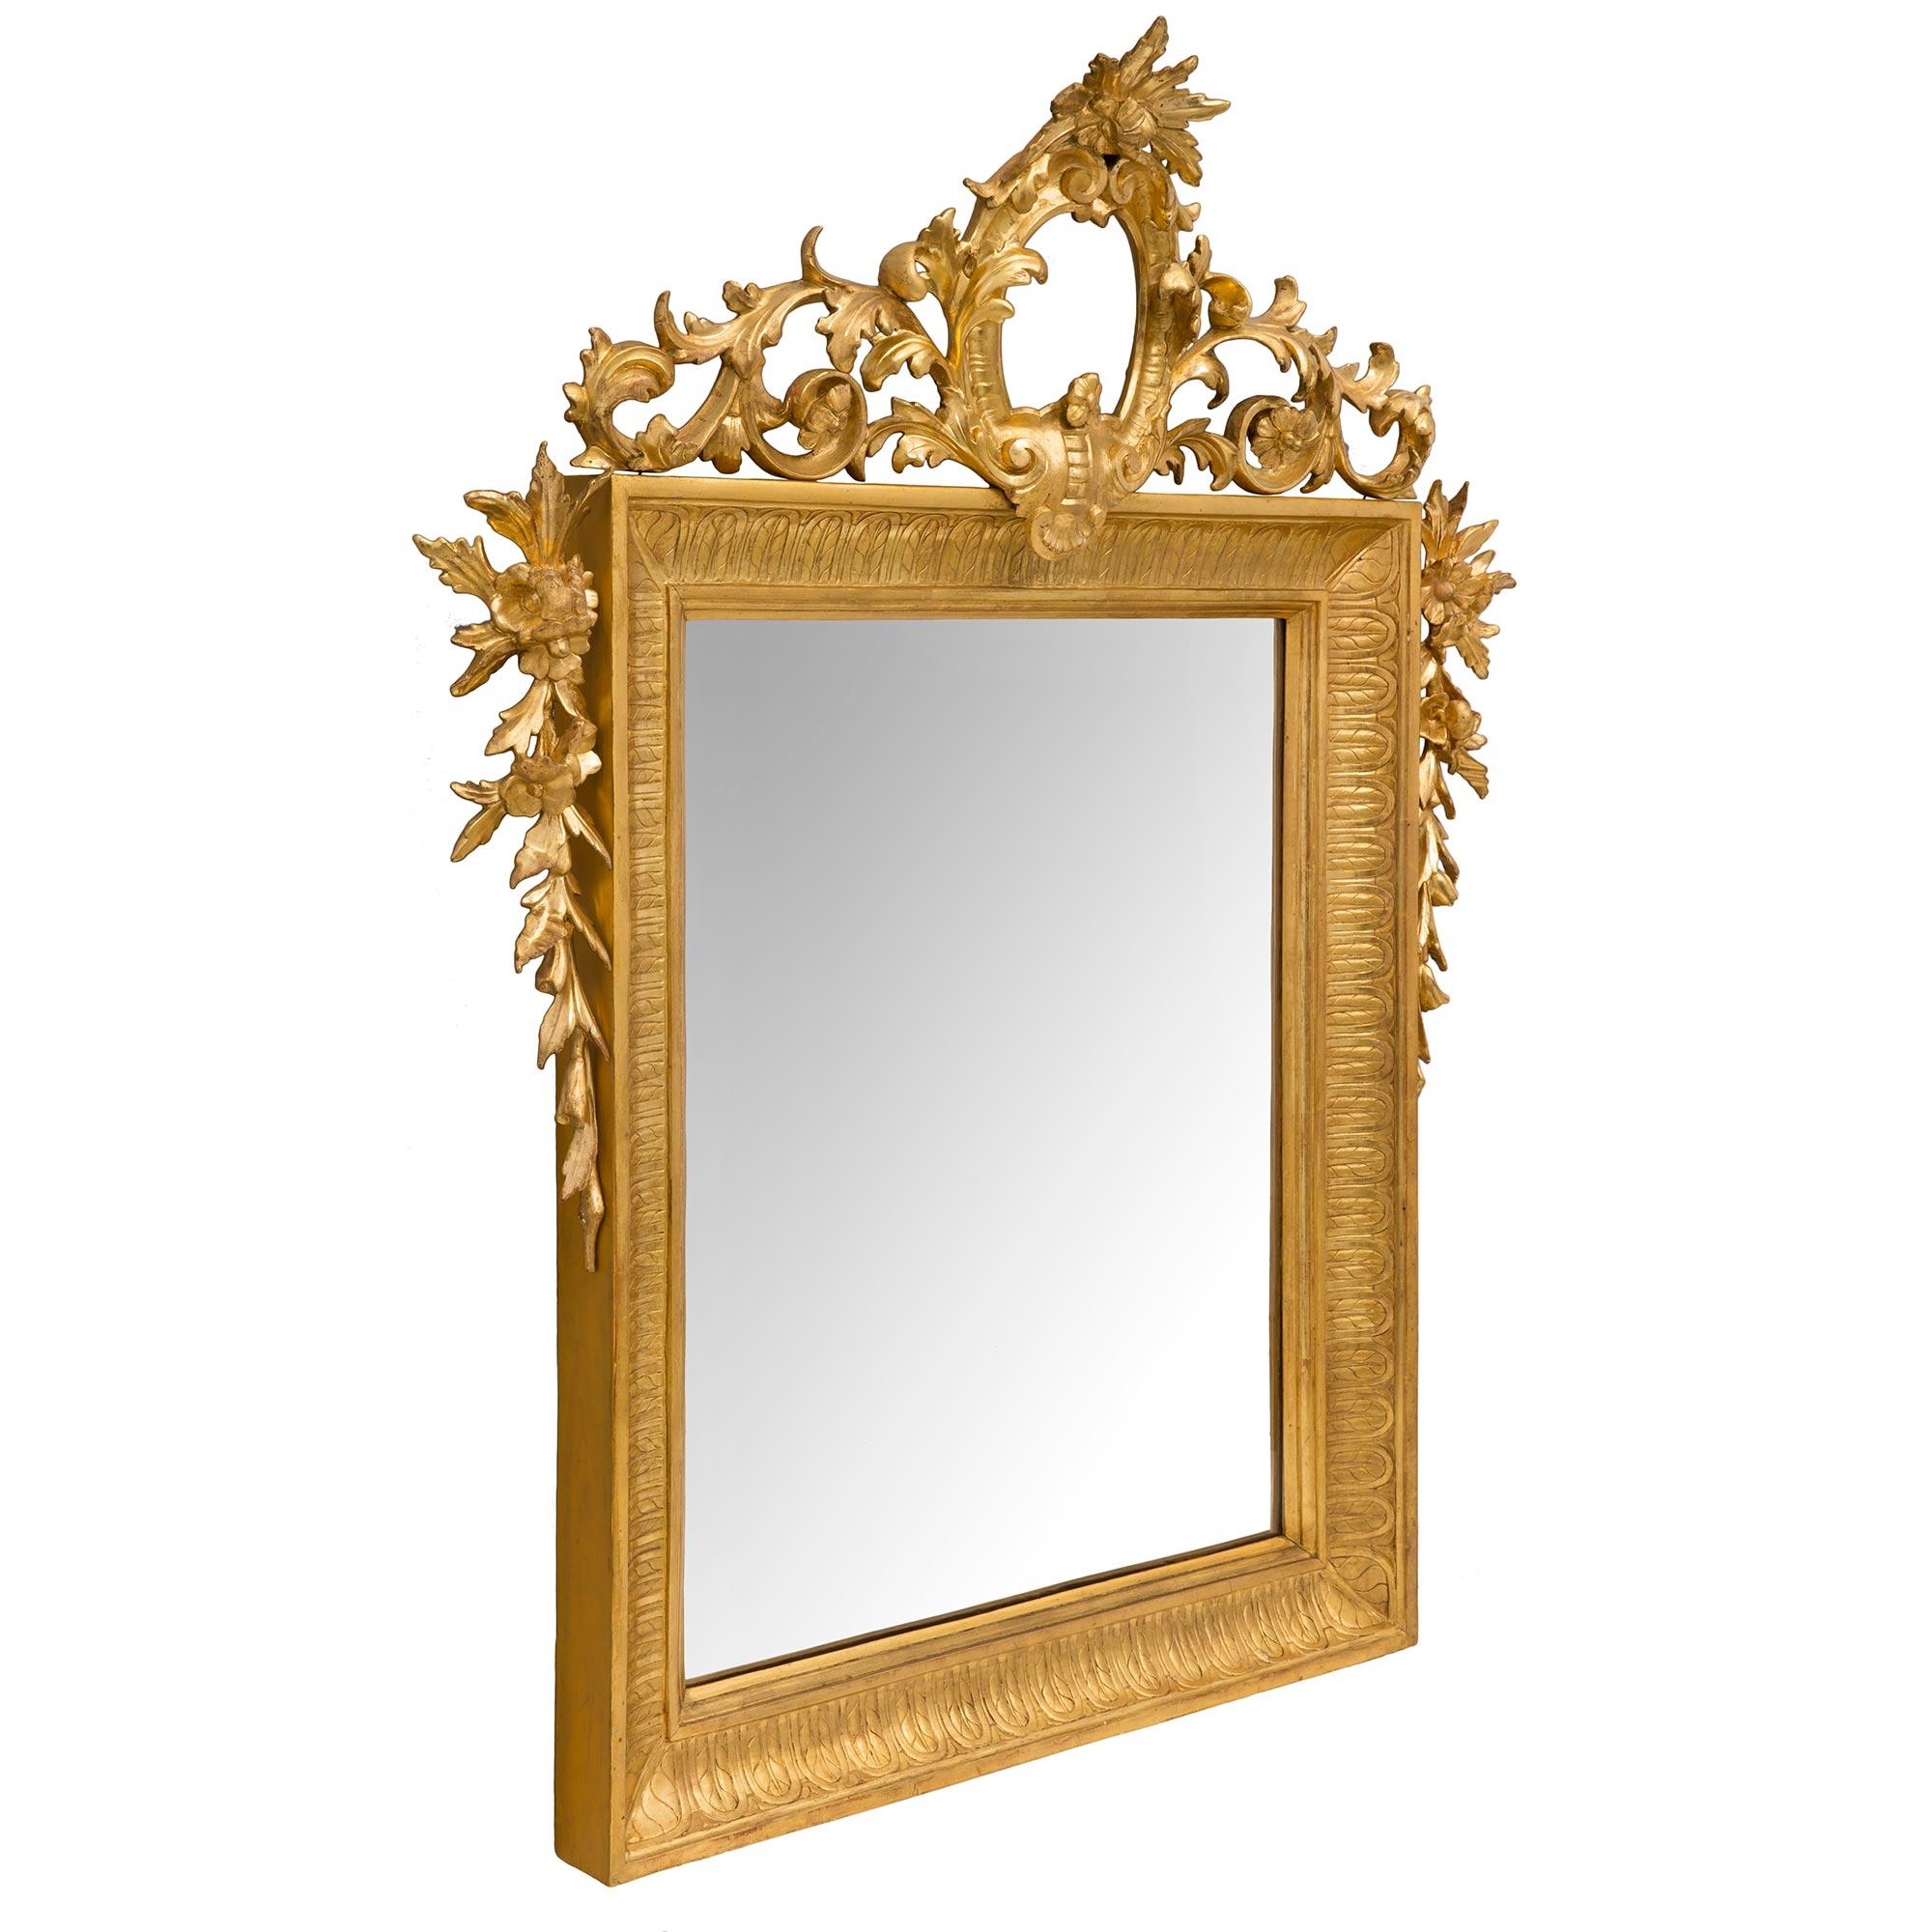 A superb pair of French 19th century Louis XVI st. giltwood mirrors. Each mirror retains its original mirror plate framed within a beautiful mottled giltwood frame with foliate designs. Leading up each side and at the top crown are striking and